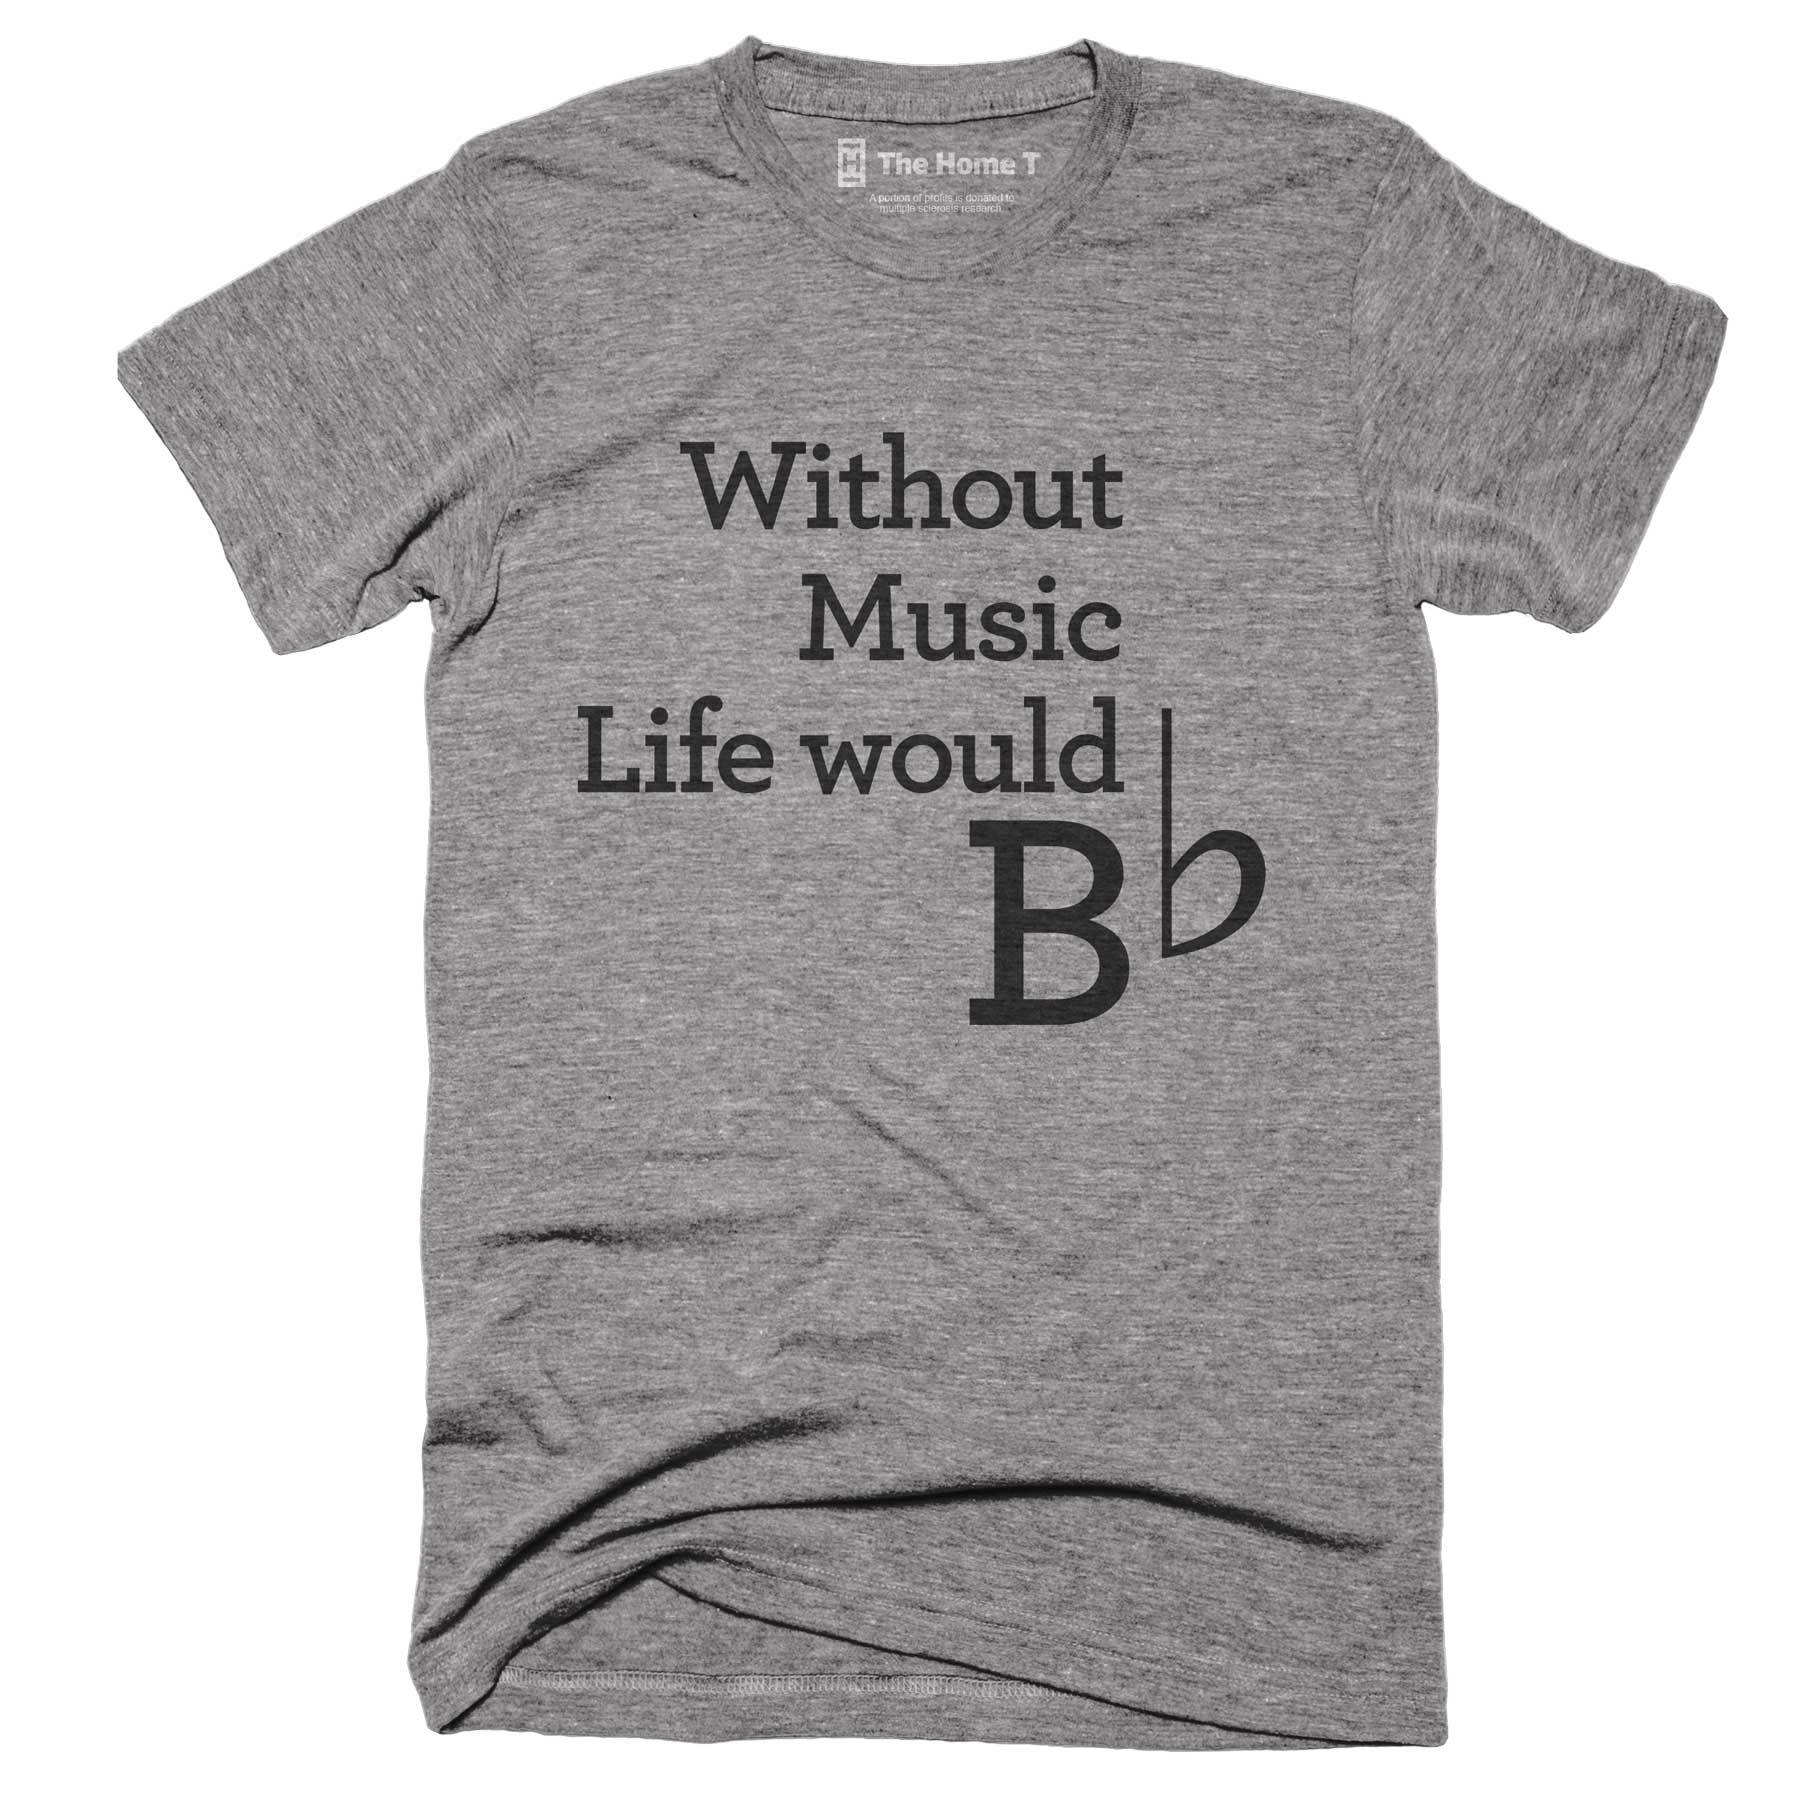 Without Music Life Would B-Flat